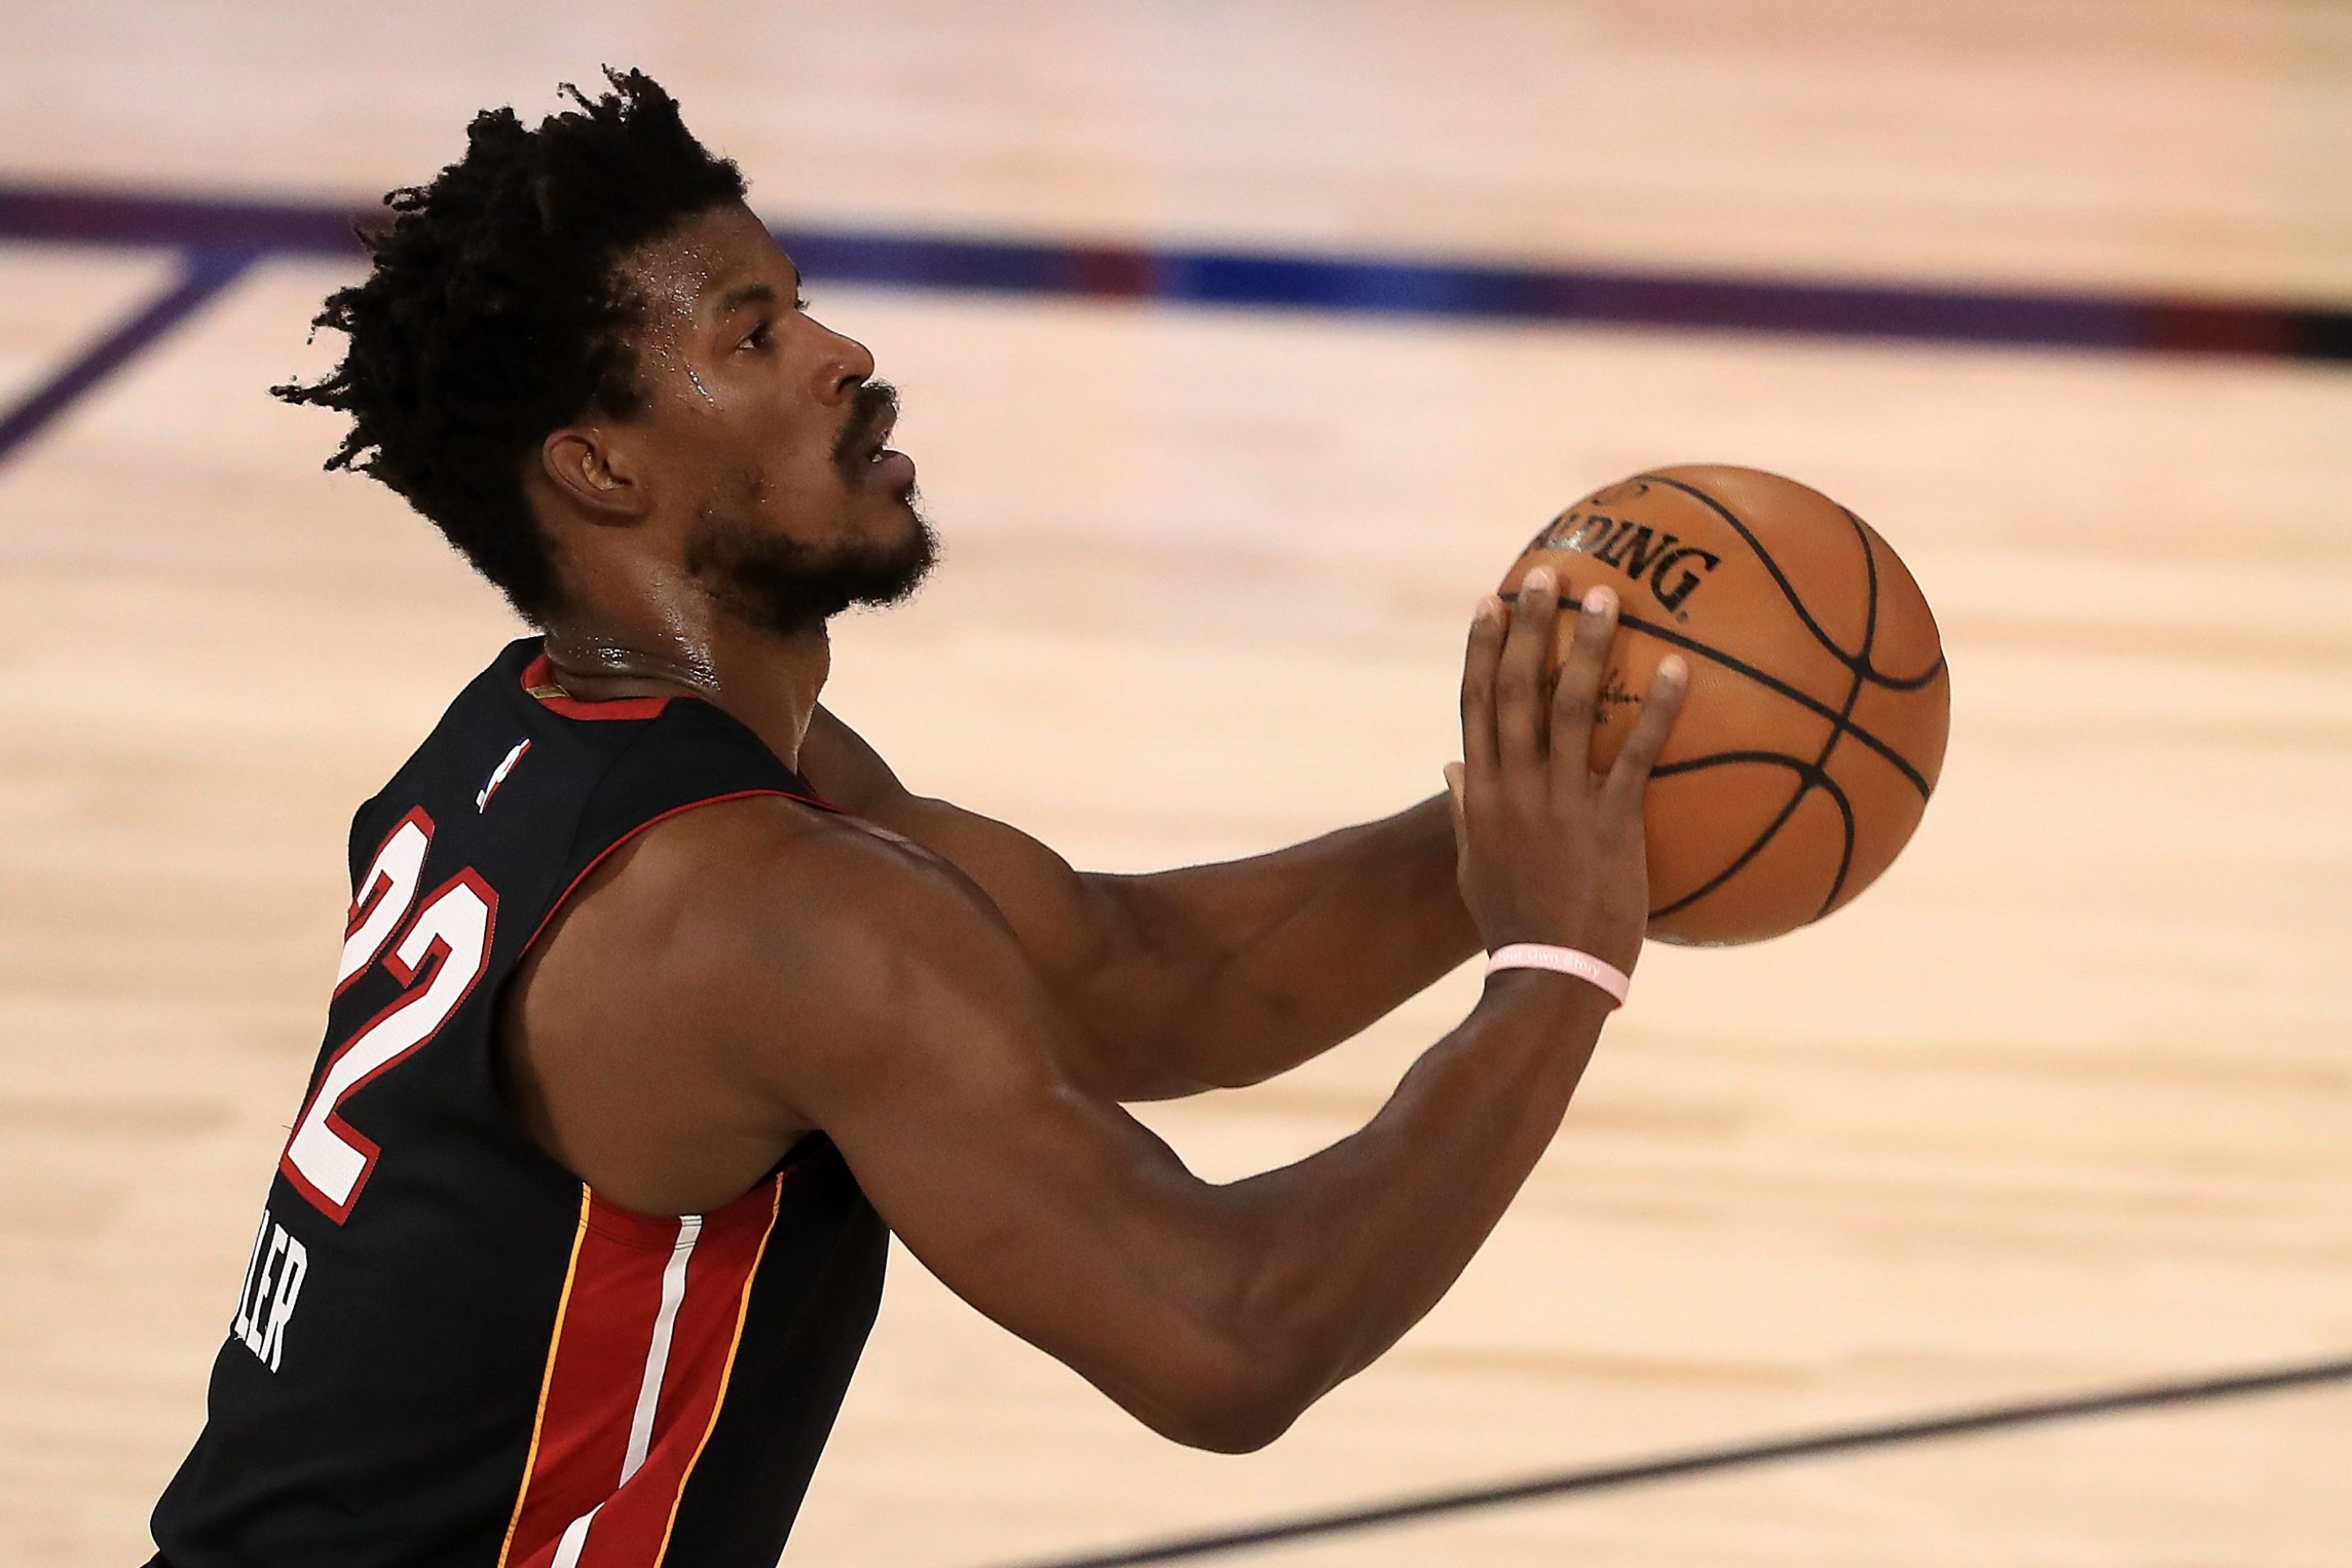 Jimmy Butler of the Miami Heat lines up another free throw during a playoff series against the Milwaukee Bucks.